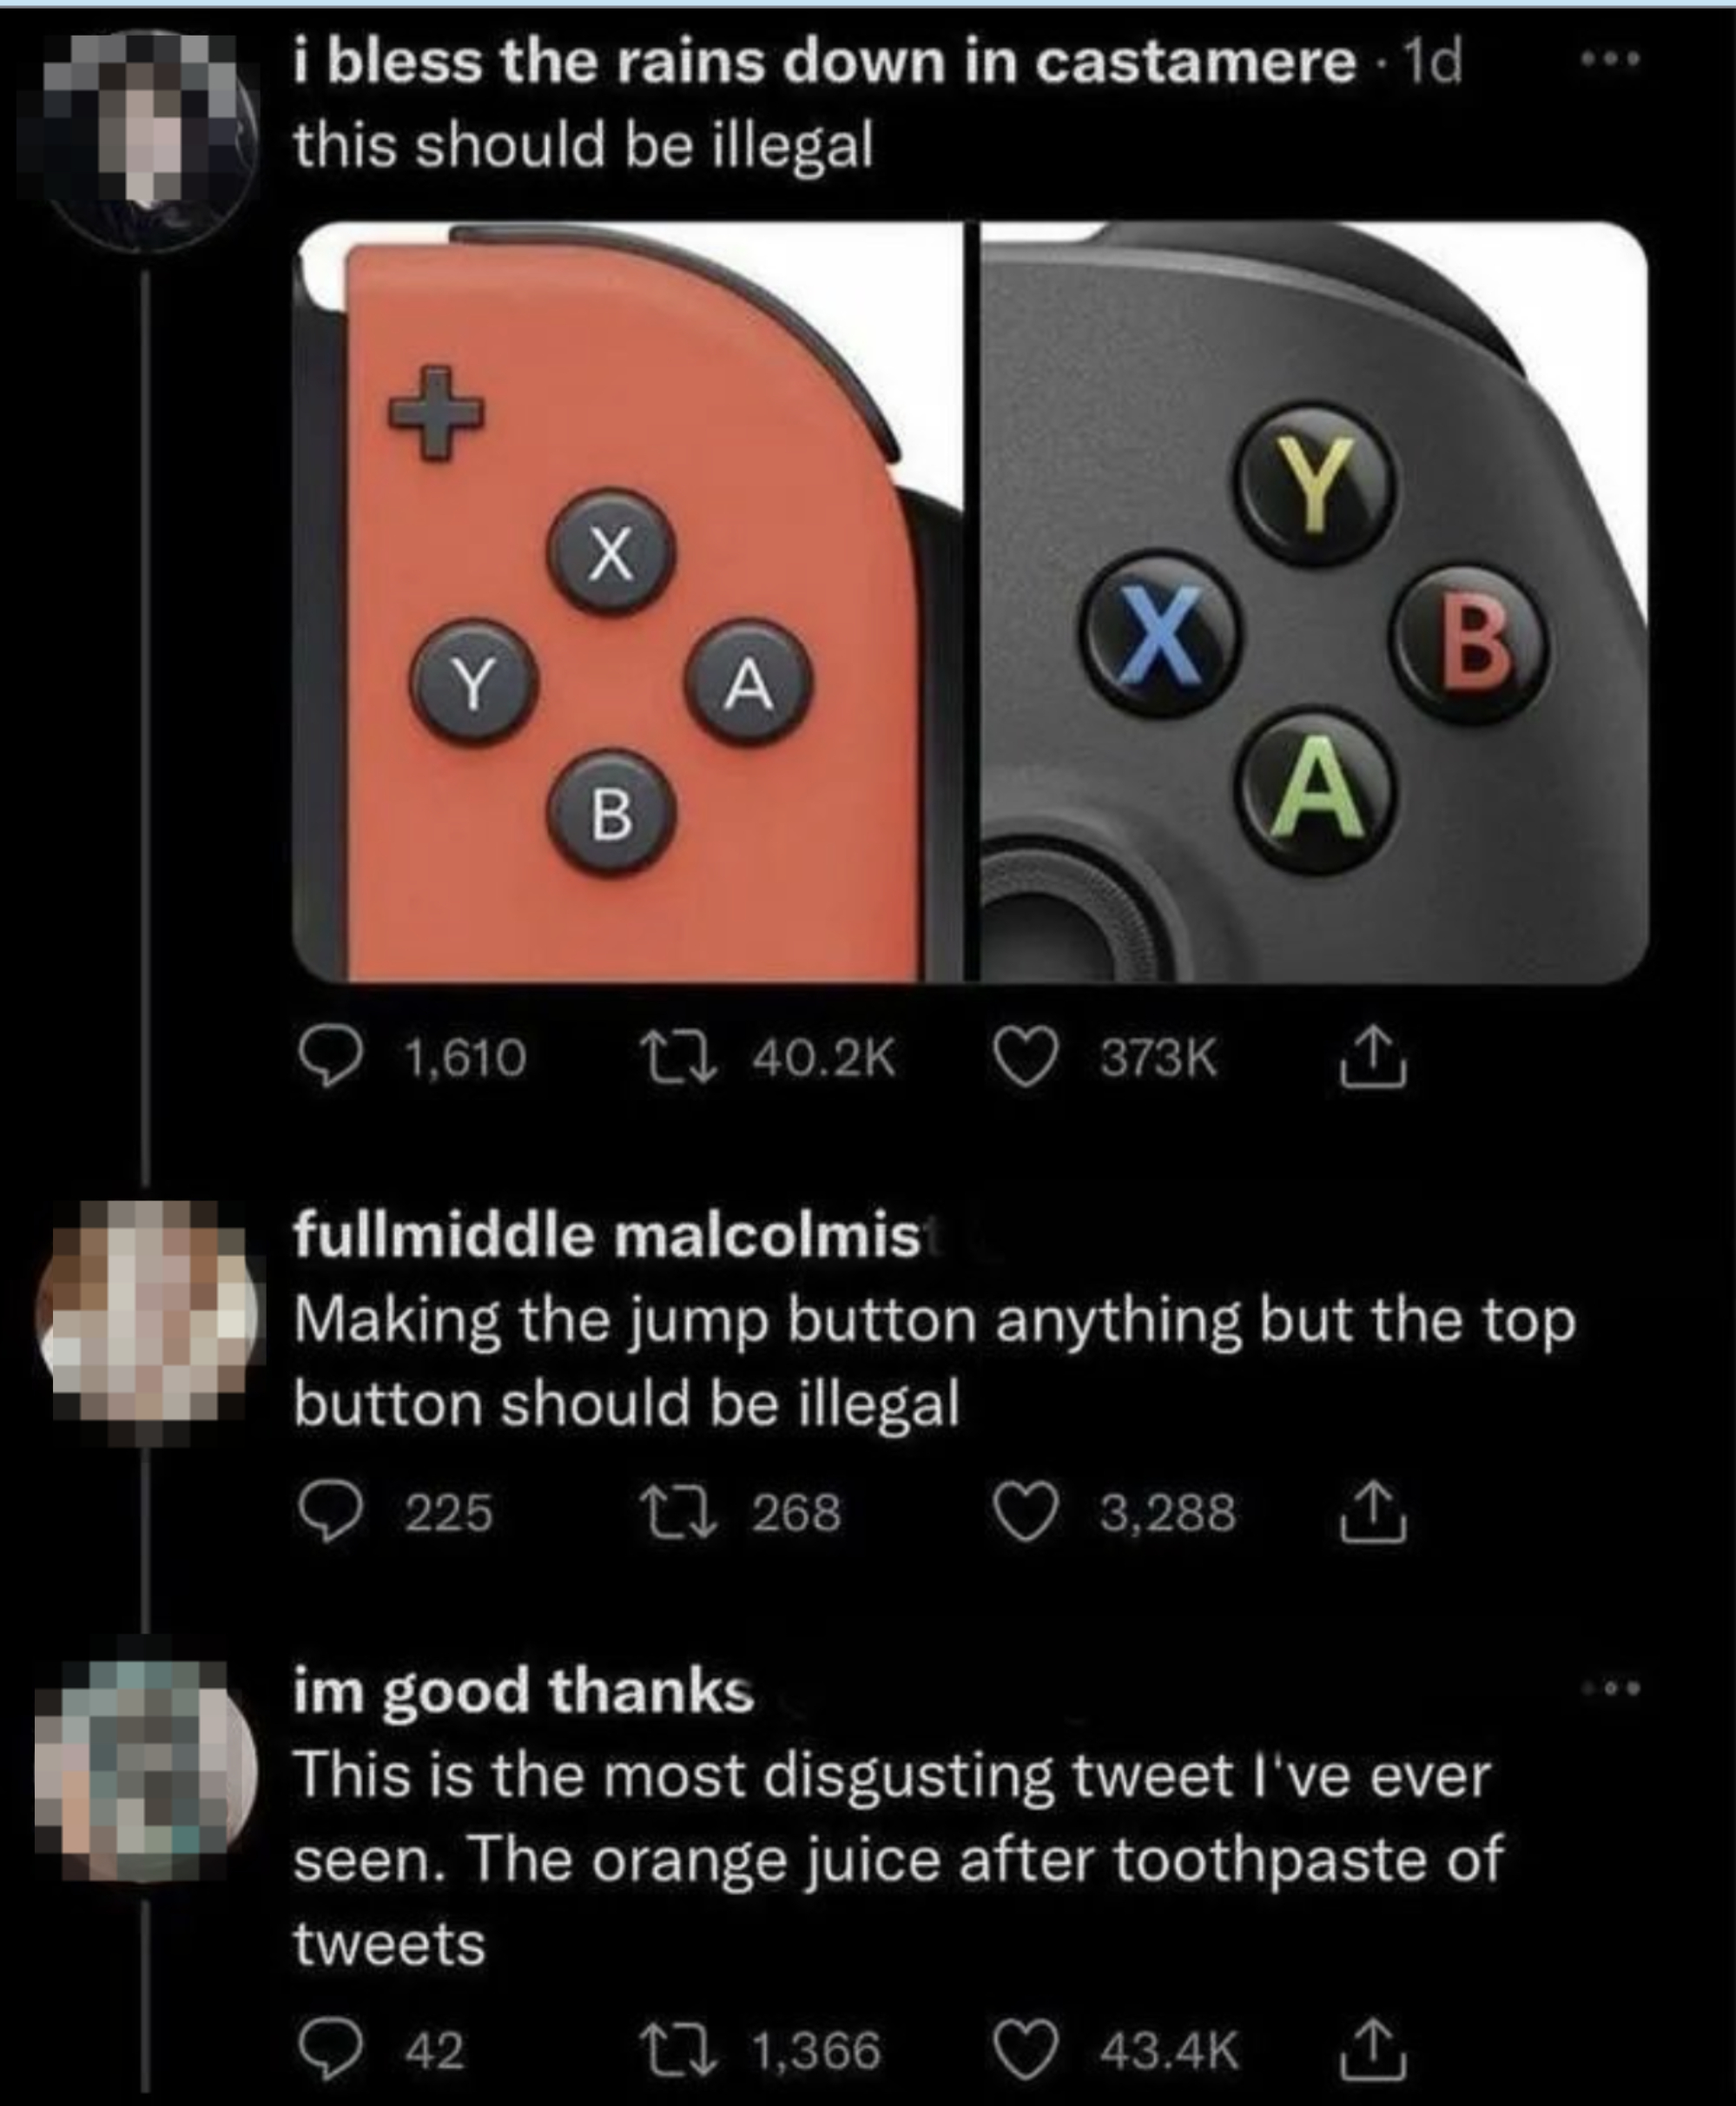 &quot;This should be illegal,&quot; showing a video game console with YXAB and XYBA; responses: &quot;Making the jump button anything but the top button s/b illegal&quot; and &quot;This is the most disgusting tweet I&#x27;ve ever seen; the orange juice after toothpaste of tweets&quot;